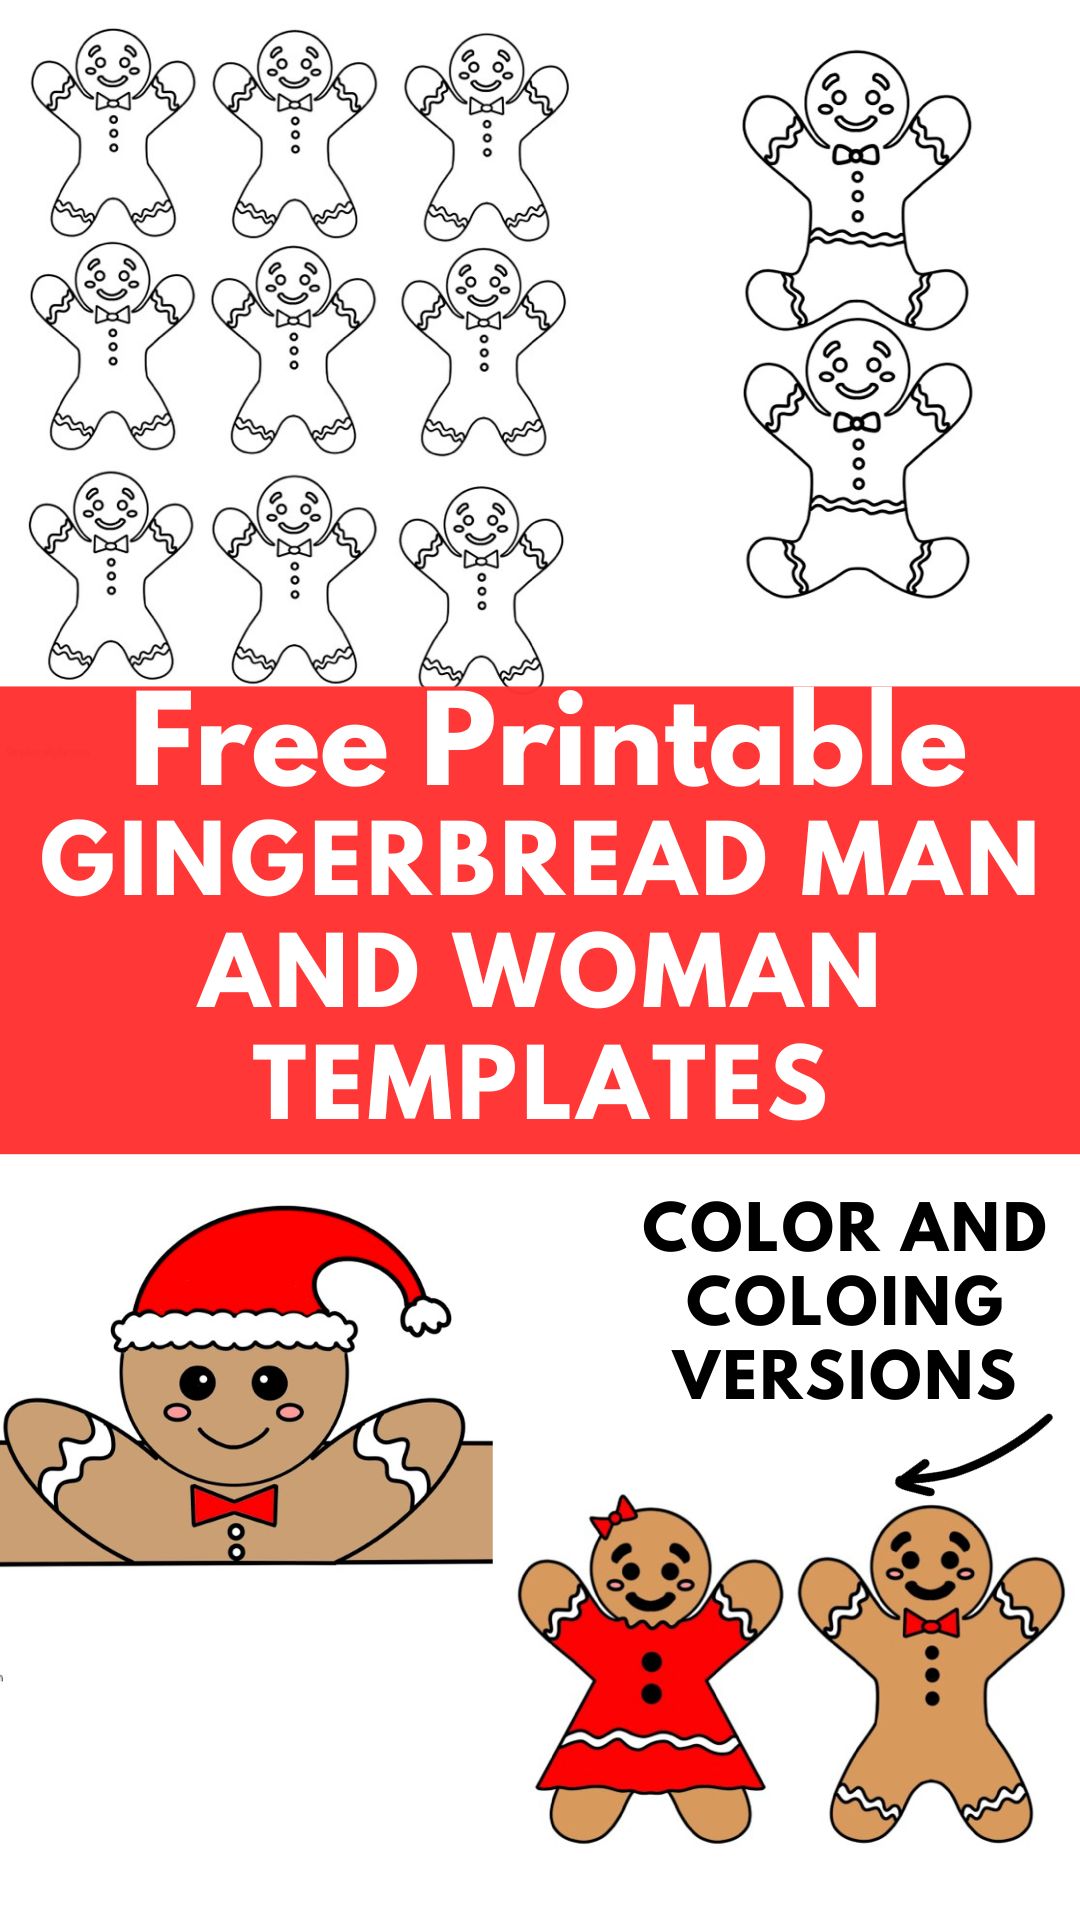 Free printable gingerbread man and woman template